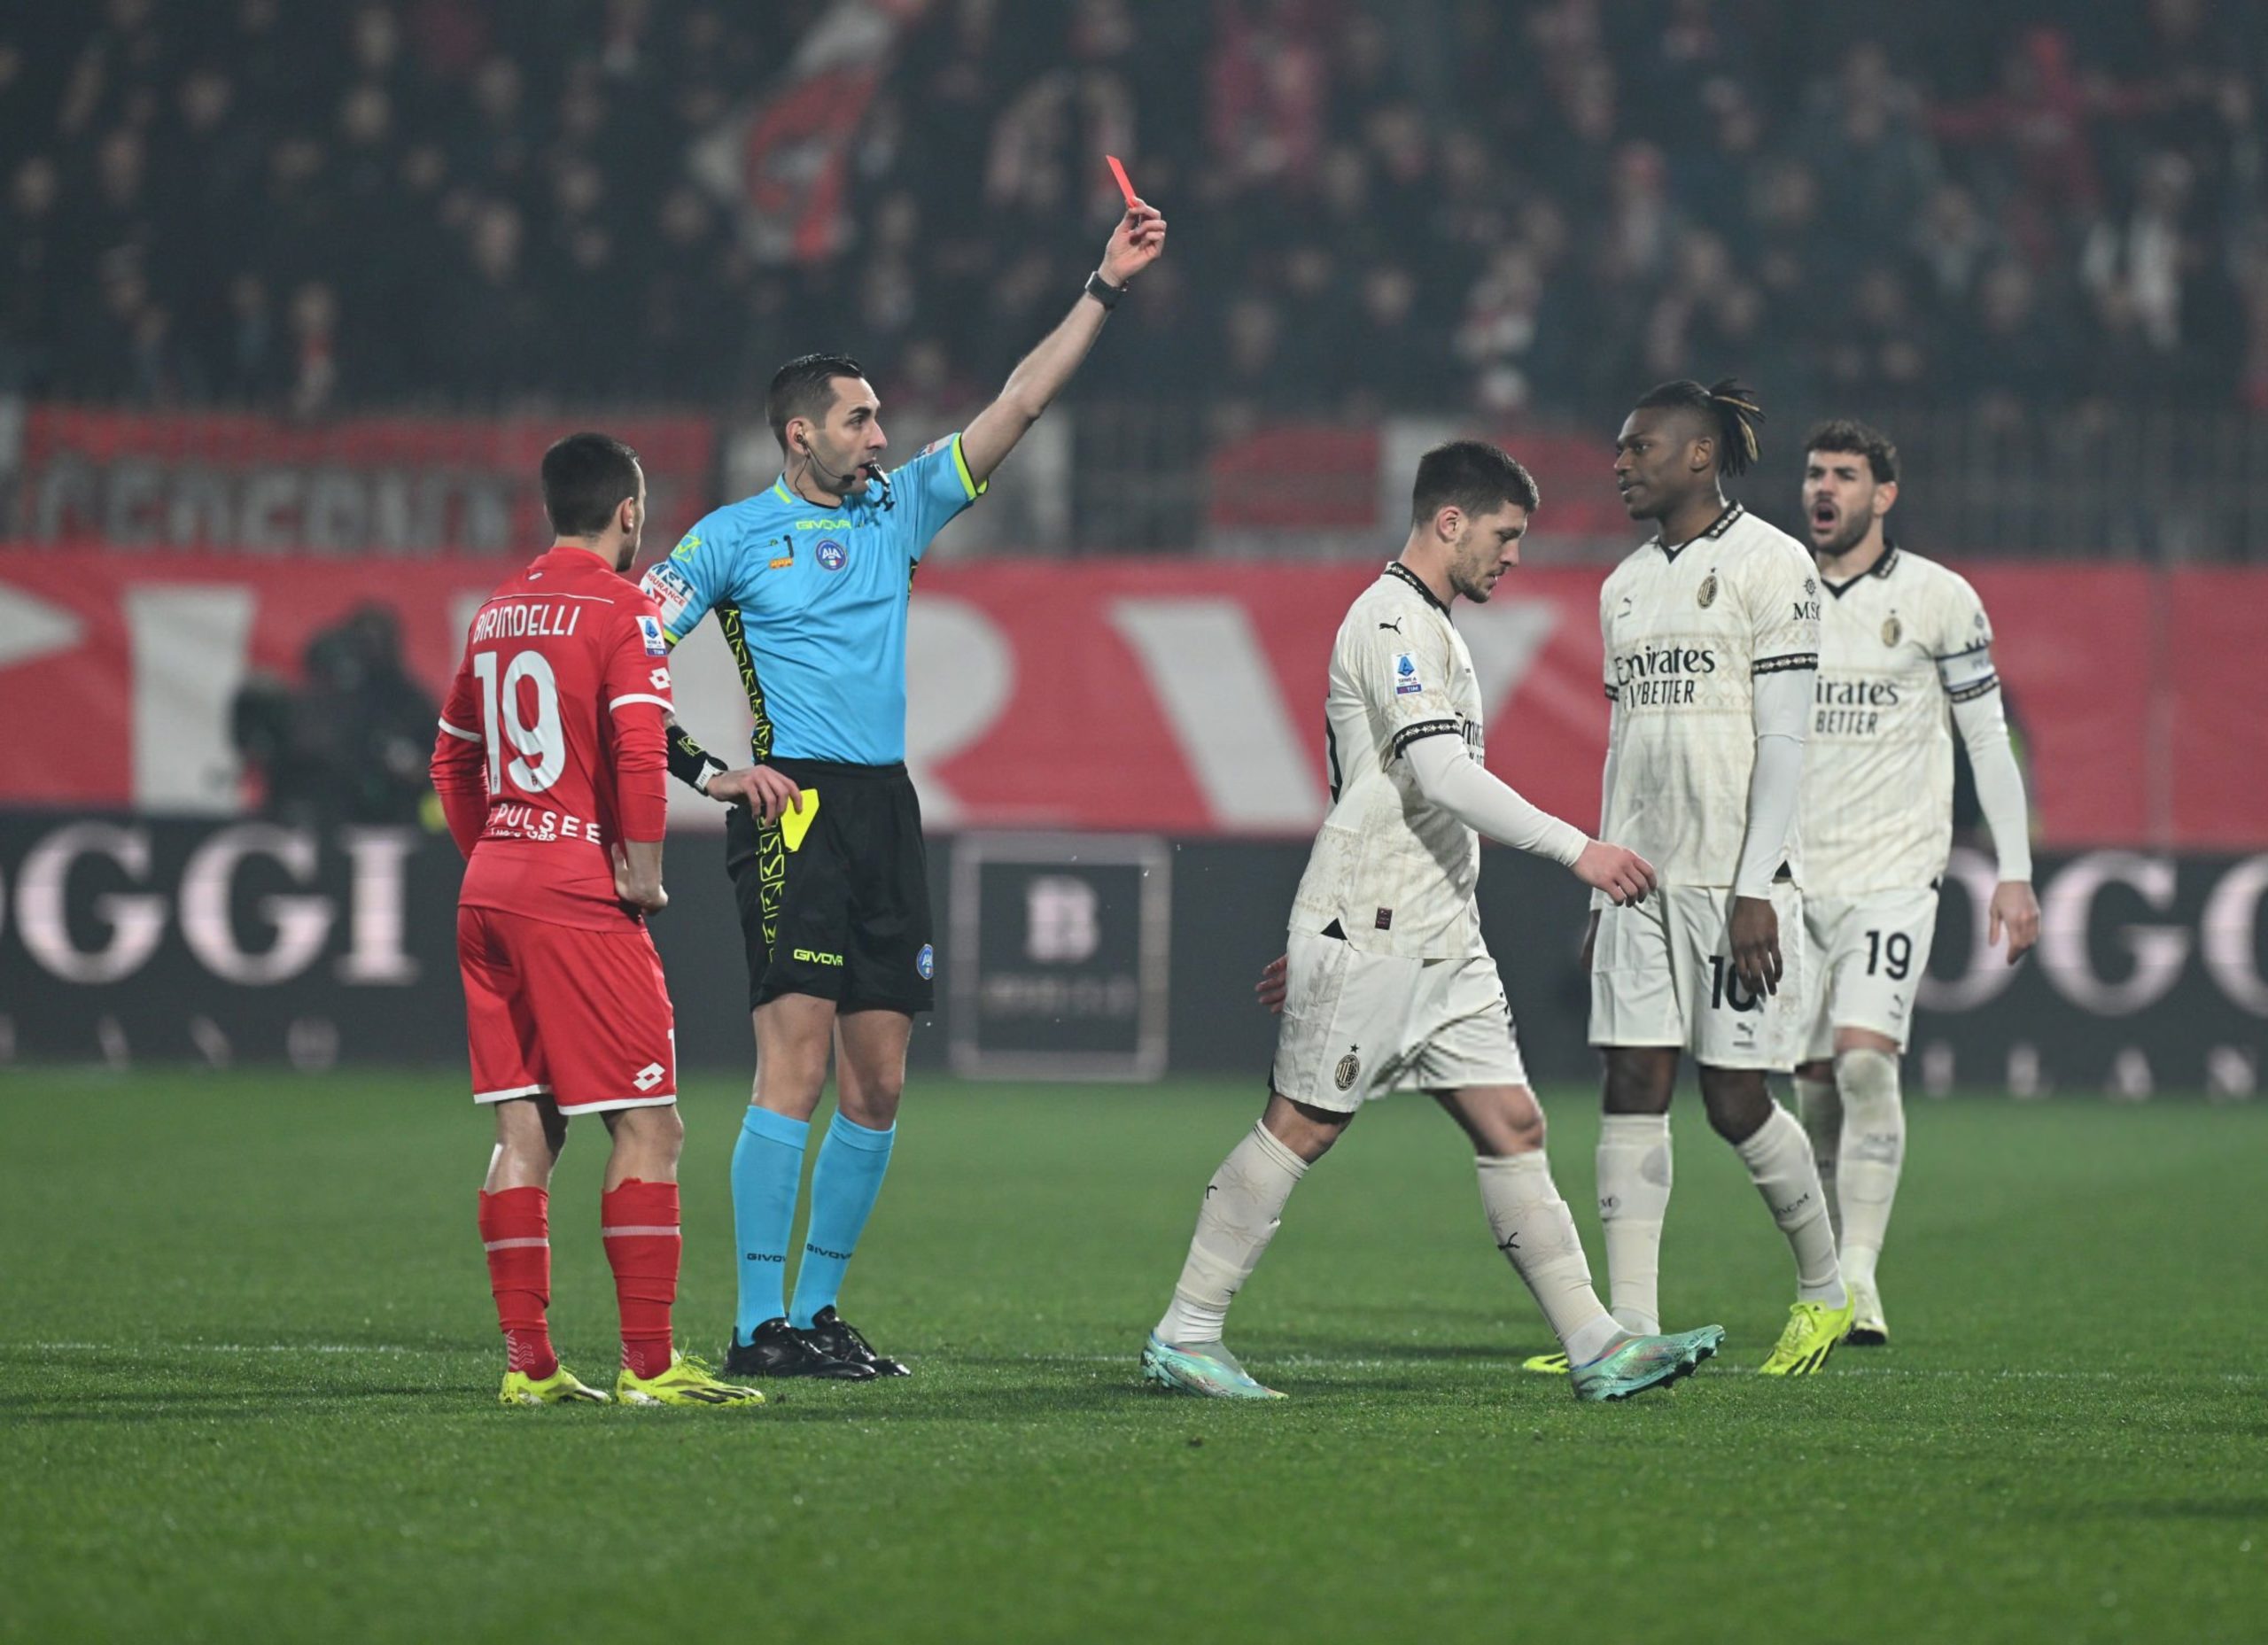 AC Milan's Luka Jovic receives a red card during match vs AC Monza in Serie A.يوفيتش ميلان